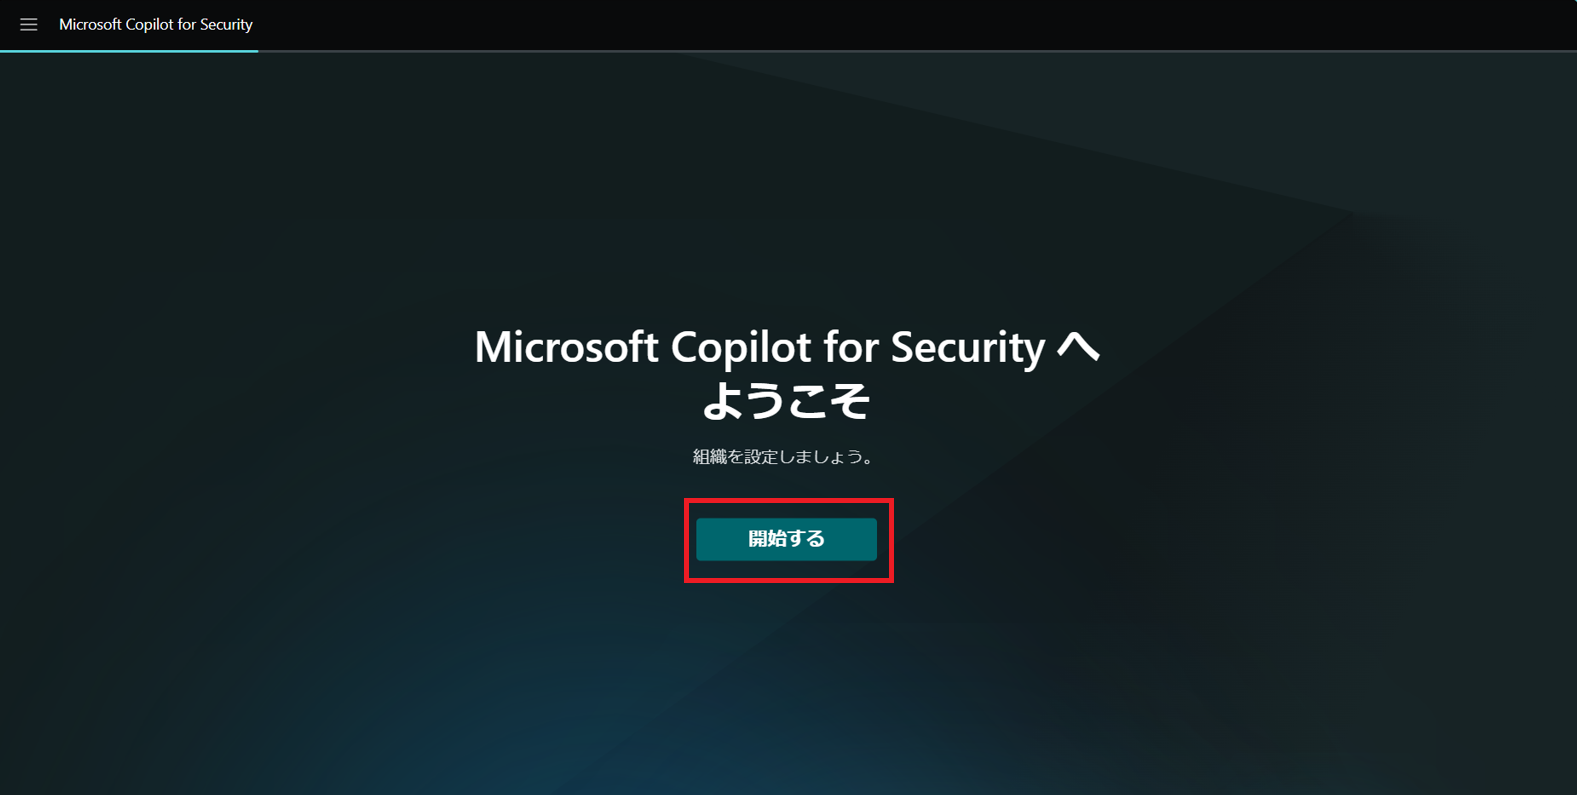 Microsoft Copilot for Security_触ってみた_02.png